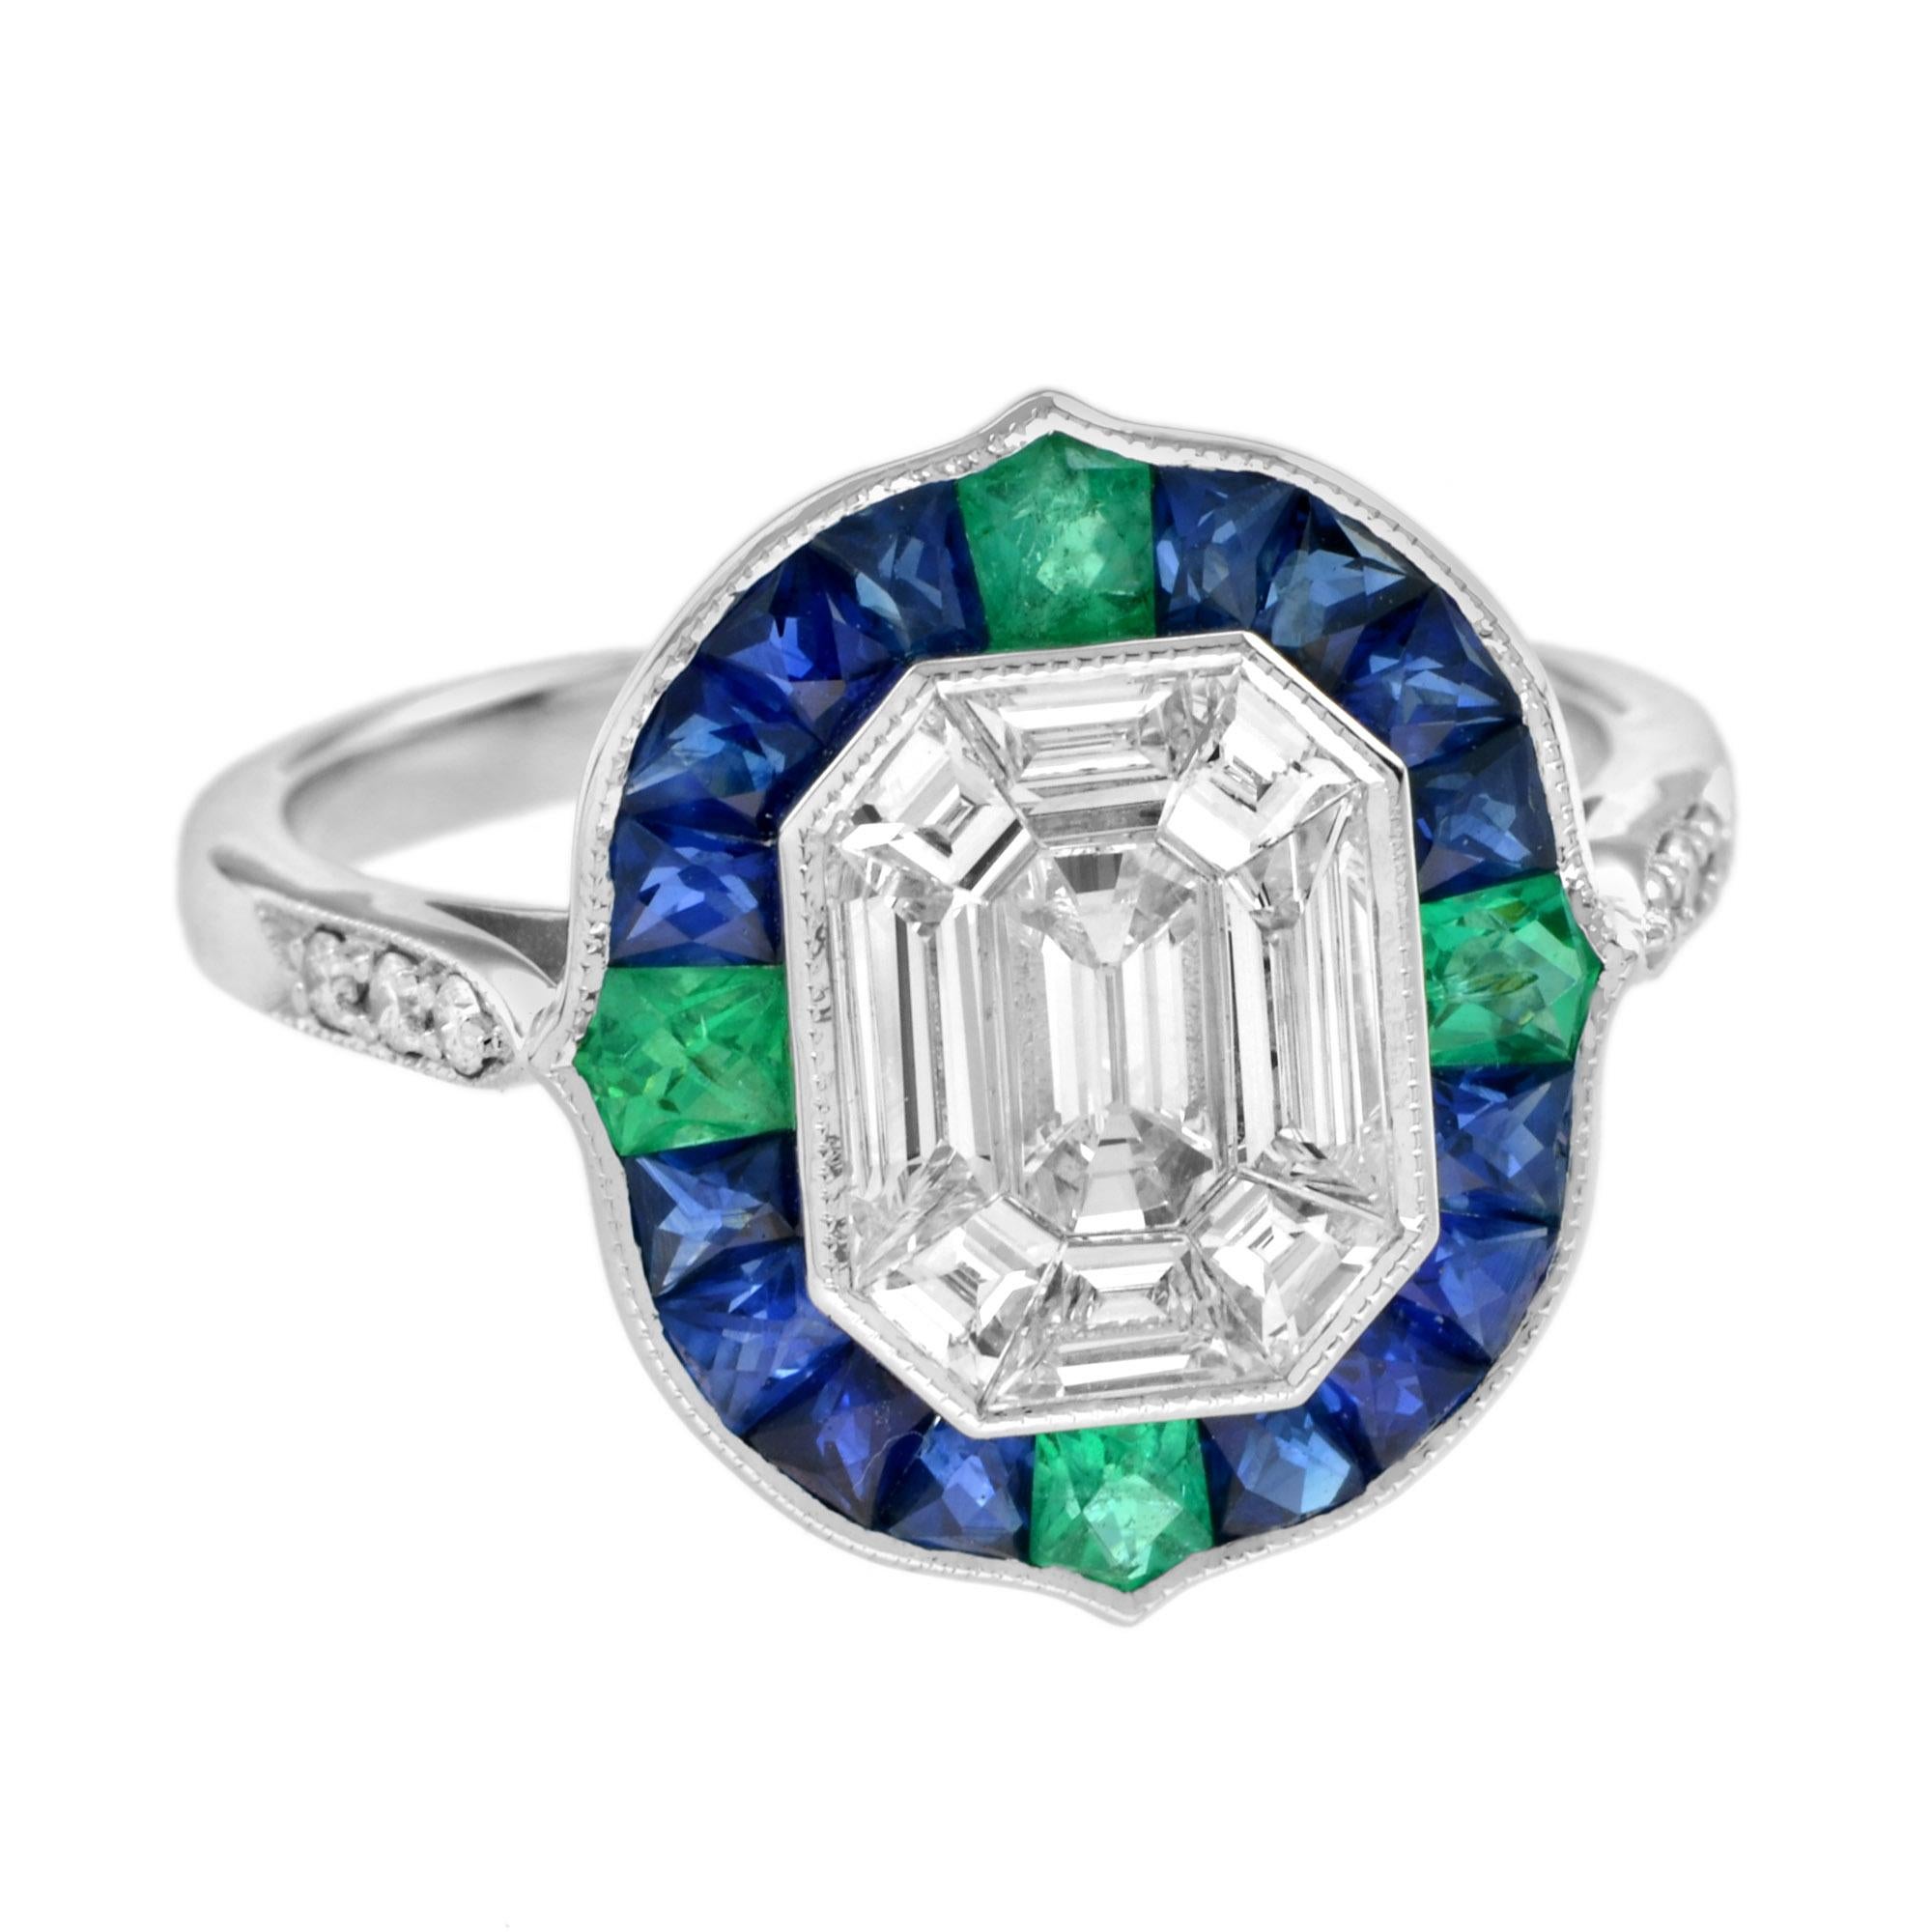 For Sale:  Illusion Setting Diamond with Sapphire Emerald Art Deco Style Ring in 18k Gold 4